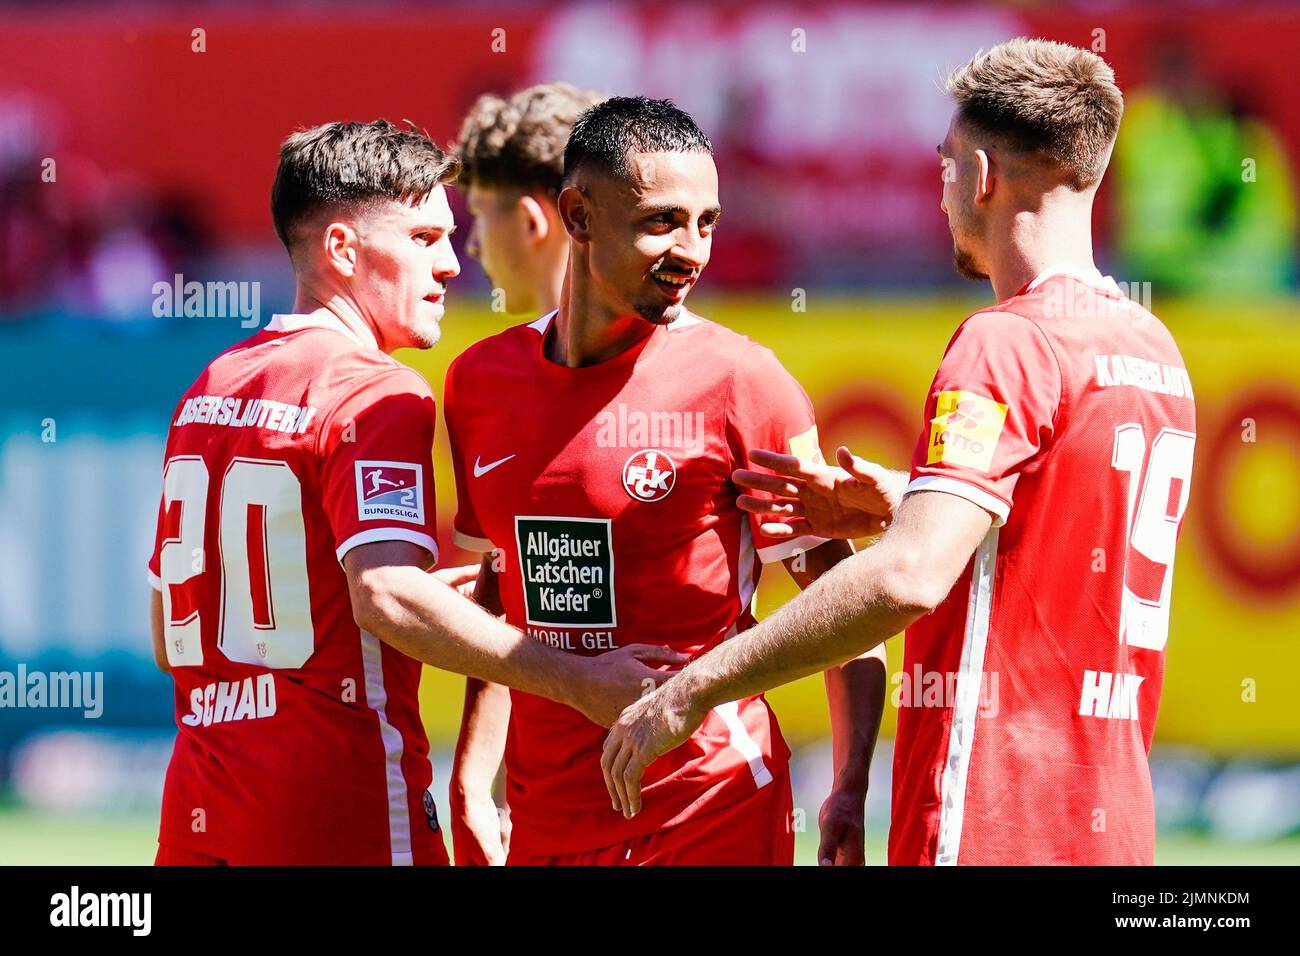 07 August 2022, Rhineland-Palatinate, Kaiserslautern: Soccer: 2nd Bundesliga, 1. FC Kaiserslautern - FC St. Pauli, Matchday 3, Fritz-Walter-Stadion. Kaiserslautern's goal scorer Kenny Prince Redondo (center) celebrates the victory with Kaiserslautern's Dominik Schad (l) and Kaiserslautern's Daniel Hanslik. Photo: Uwe Anspach/dpa - IMPORTANT NOTE: In accordance with the requirements of the DFL Deutsche Fußball Liga and the DFB Deutscher Fußball-Bund, it is prohibited to use or have used photographs taken in the stadium and/or of the match in the form of sequence pictures and/or video-like photo Stock Photo